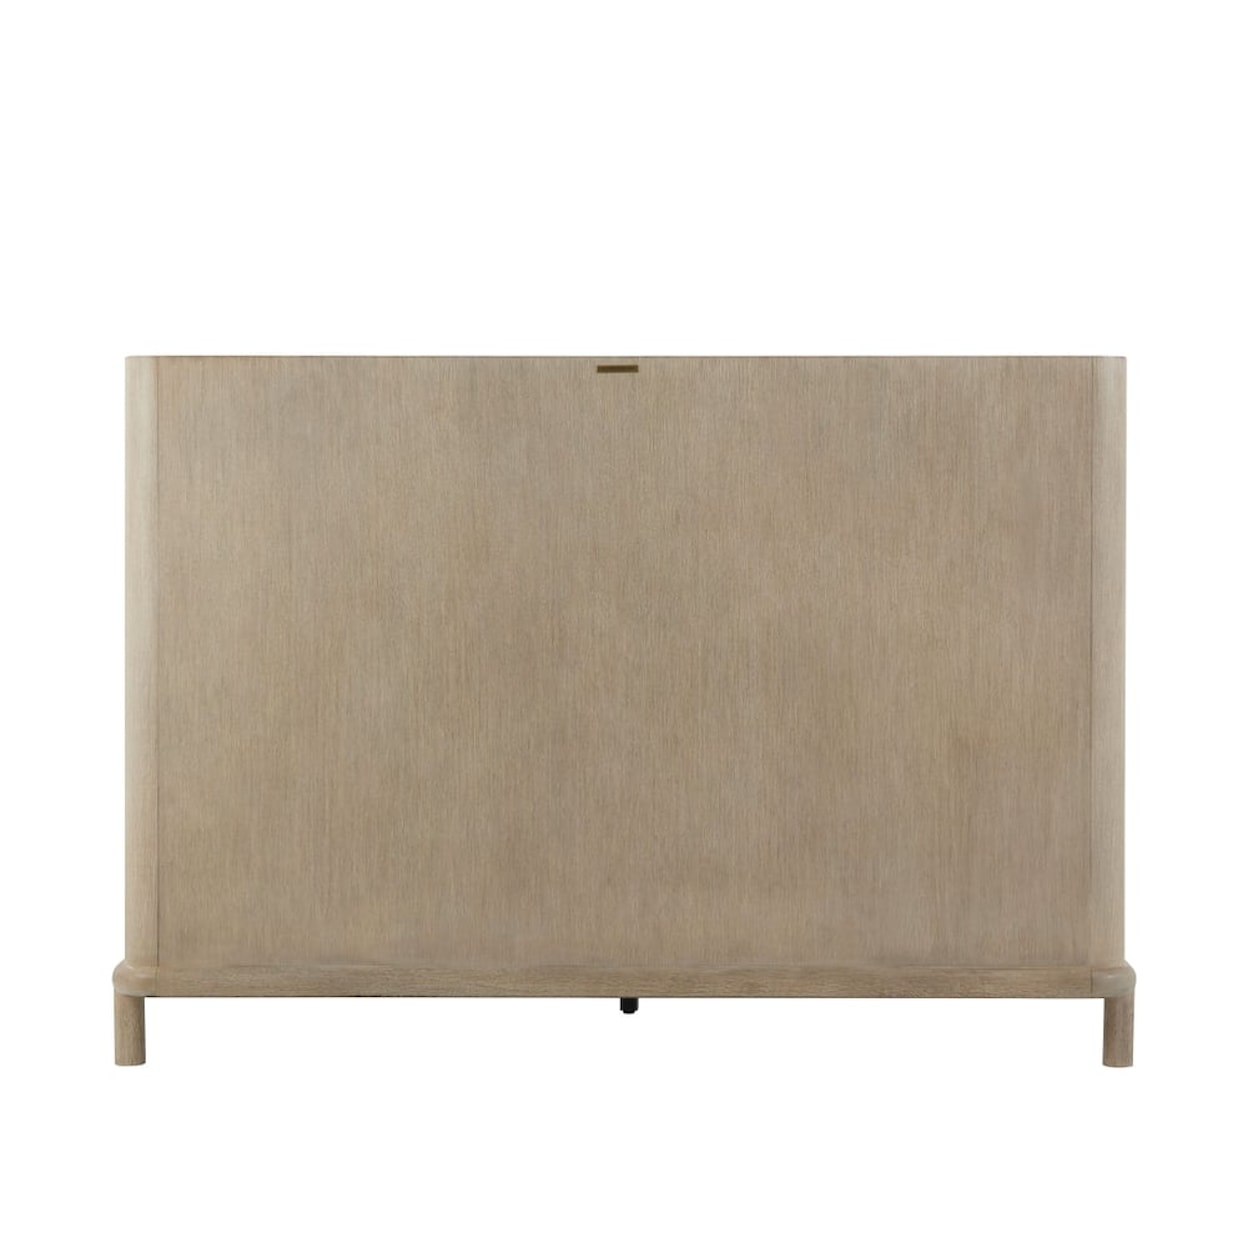 Theodore Alexander Repose Repose Wooden with Upholstered Headboard Cal